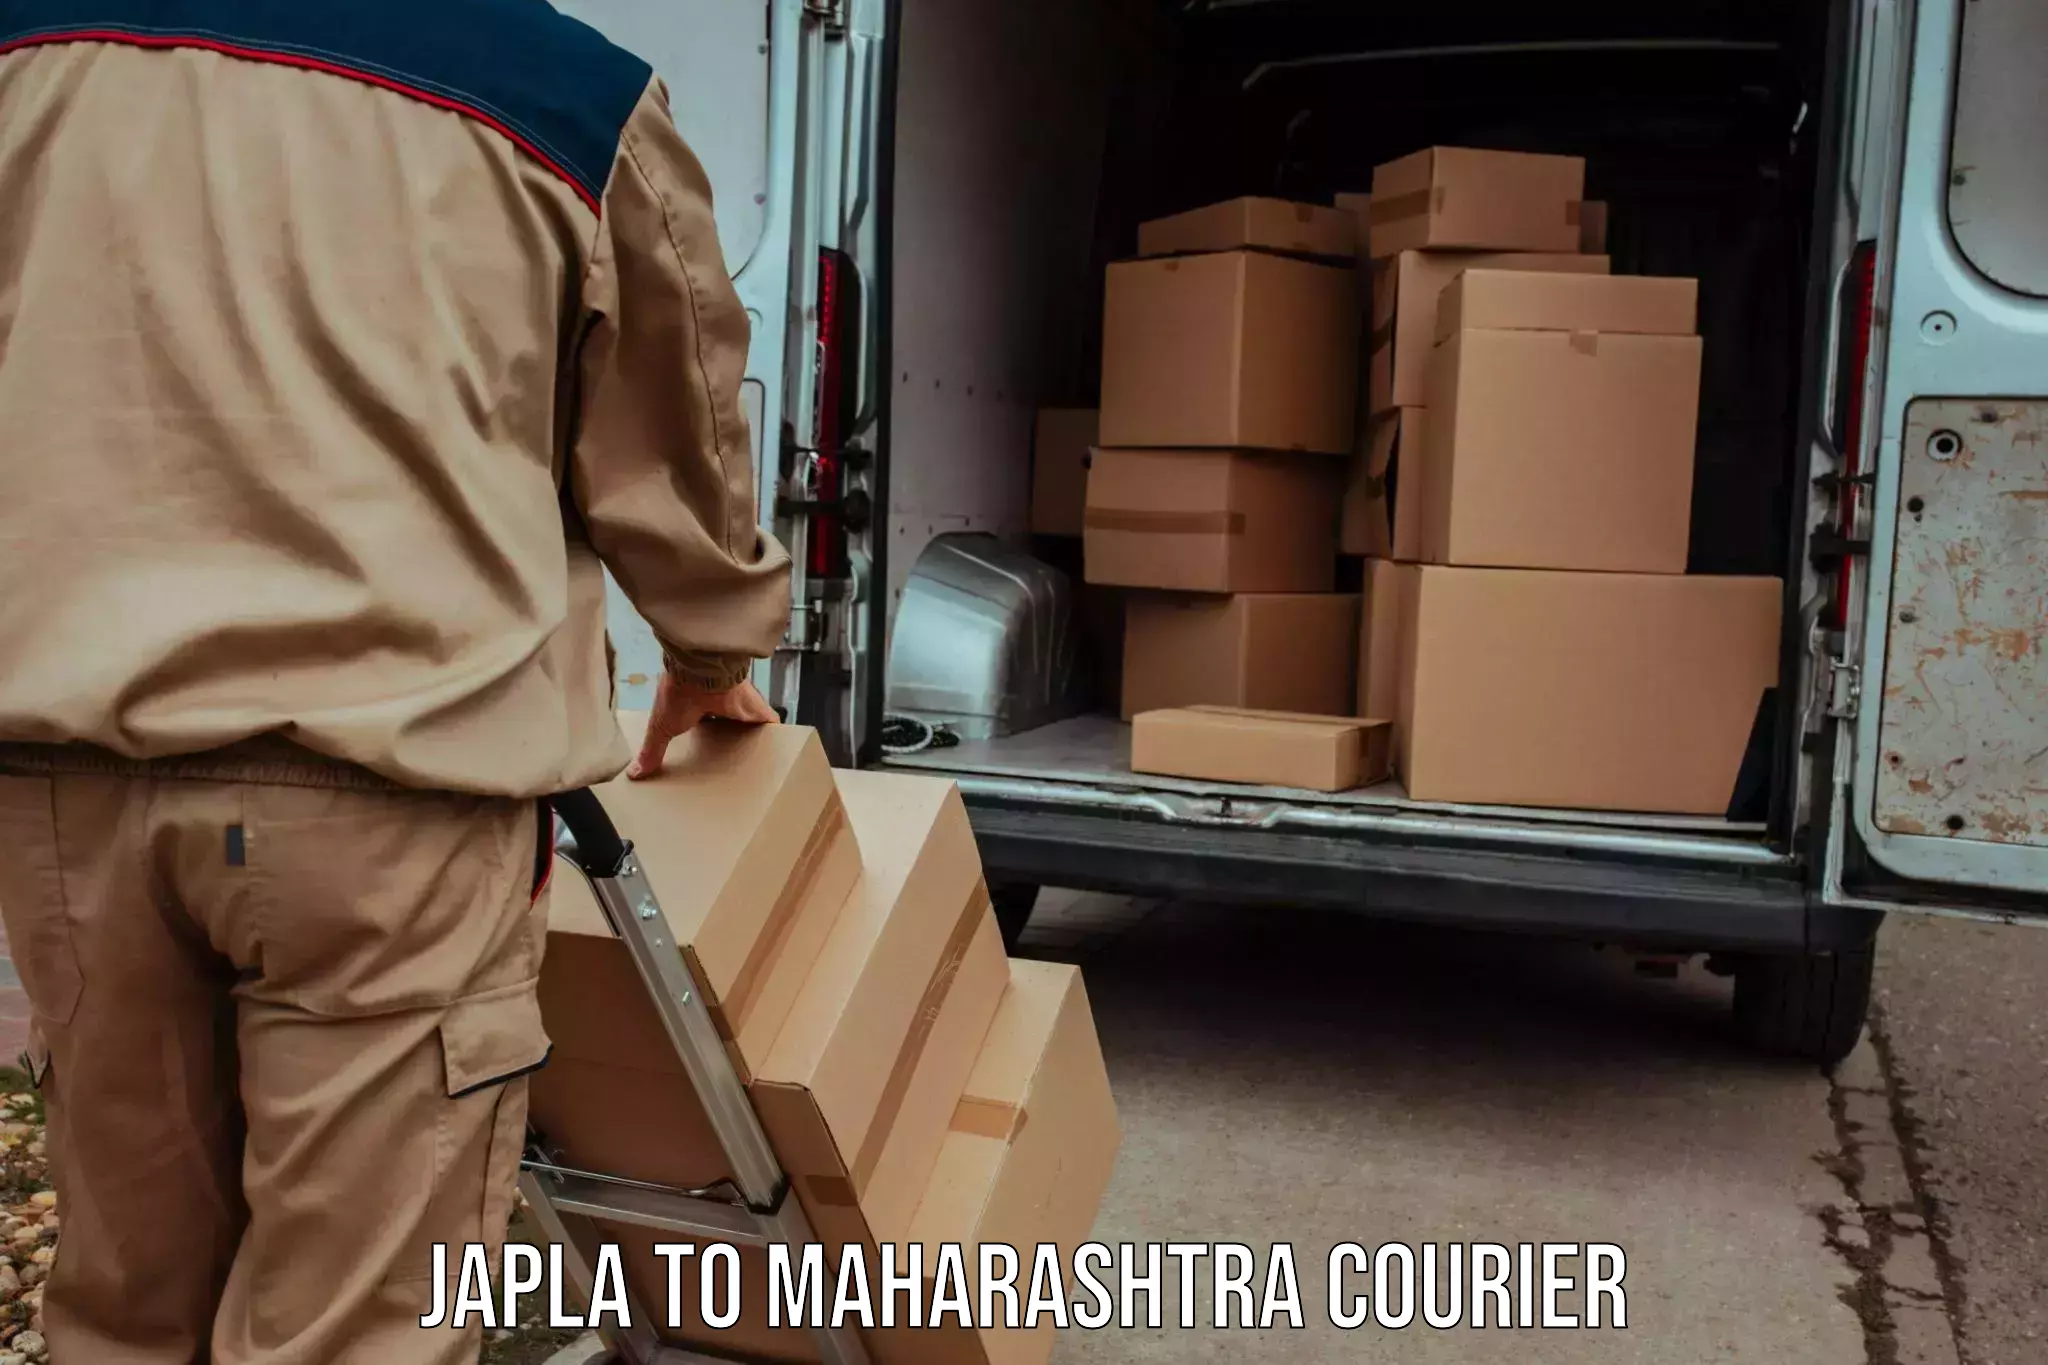 State-of-the-art courier technology Japla to Ahmednagar